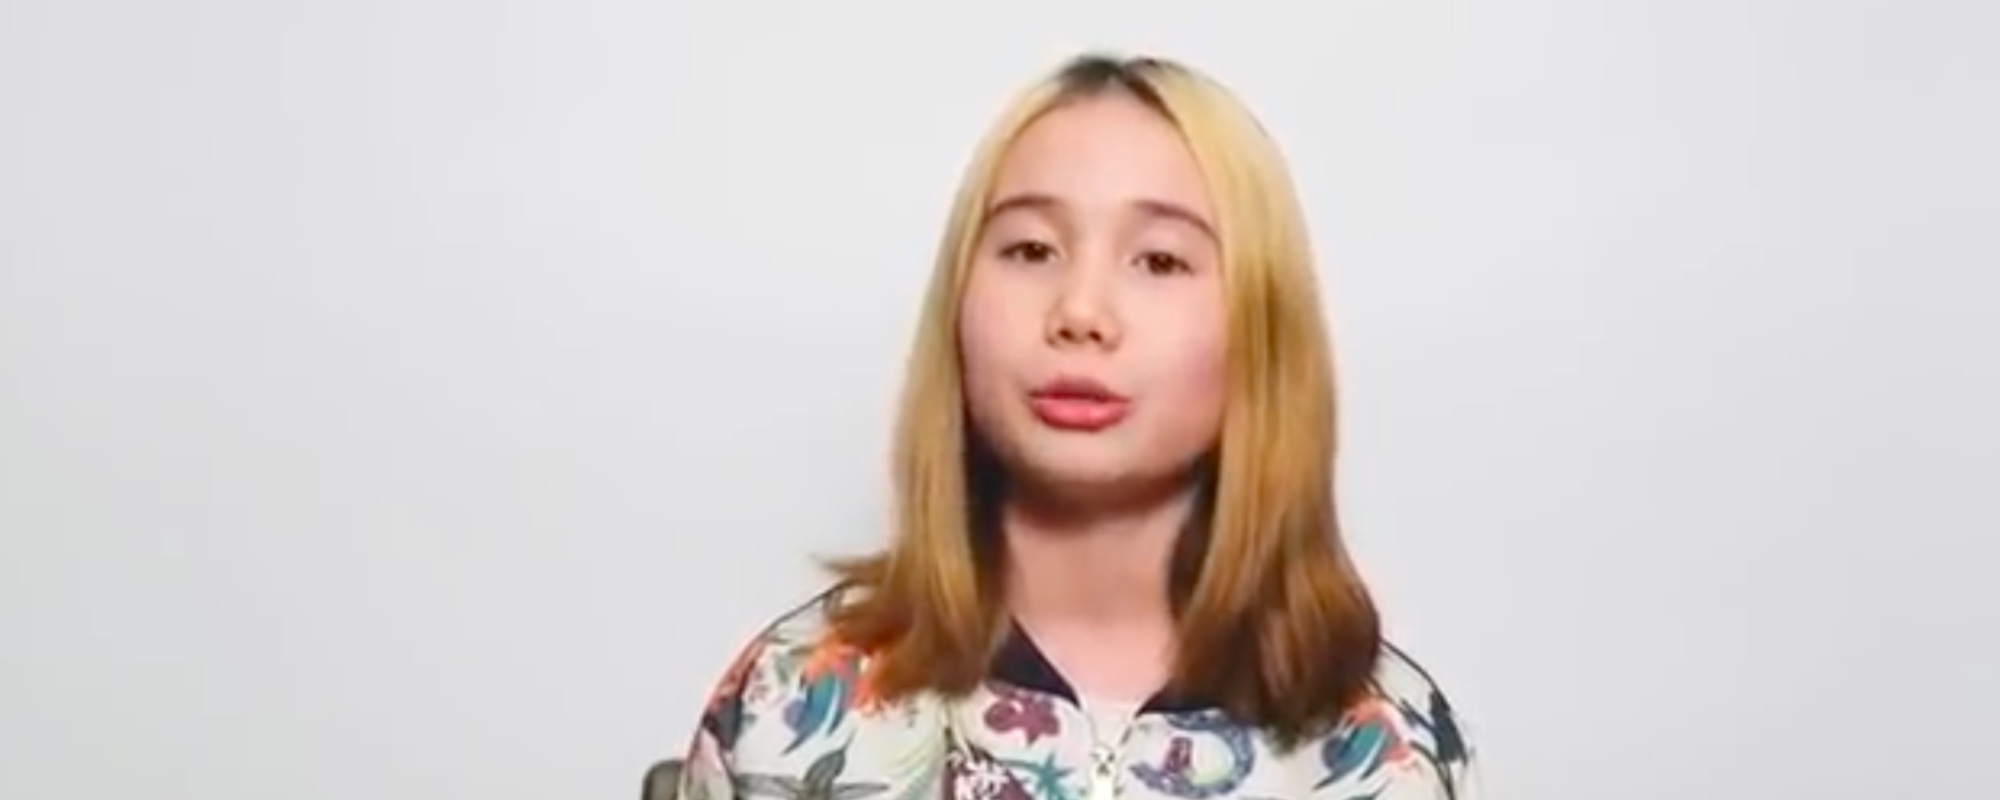 Lil Tay’s Mother Awarded Custody After False Death Report